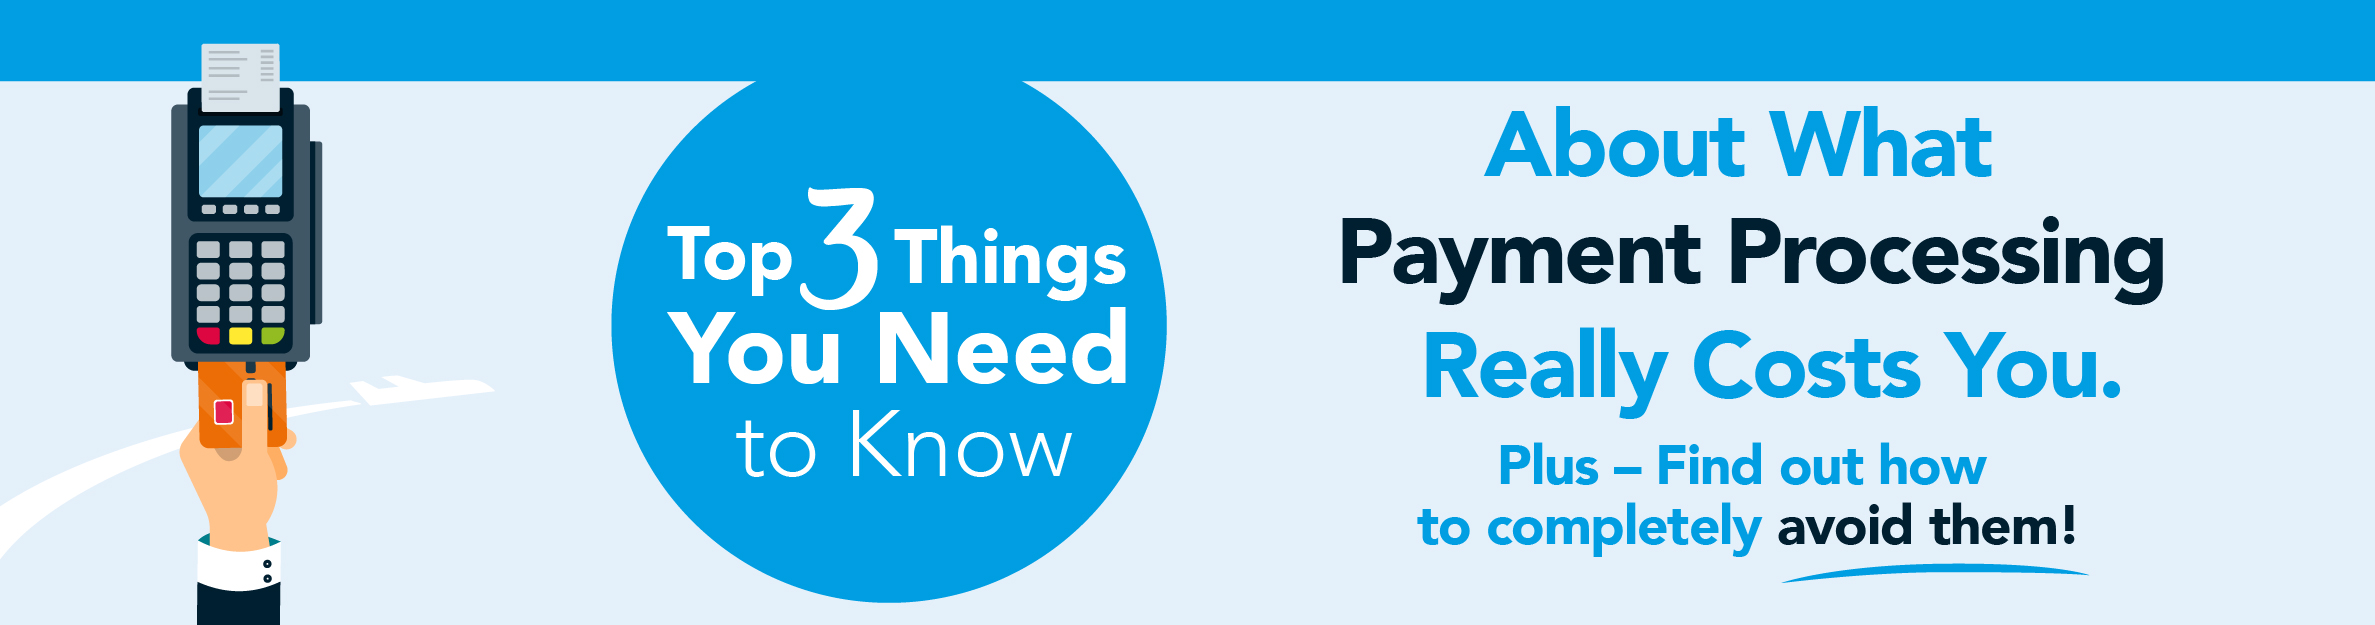 Top 3 Things You Need to Know About What Payment Processing Really Costs You.